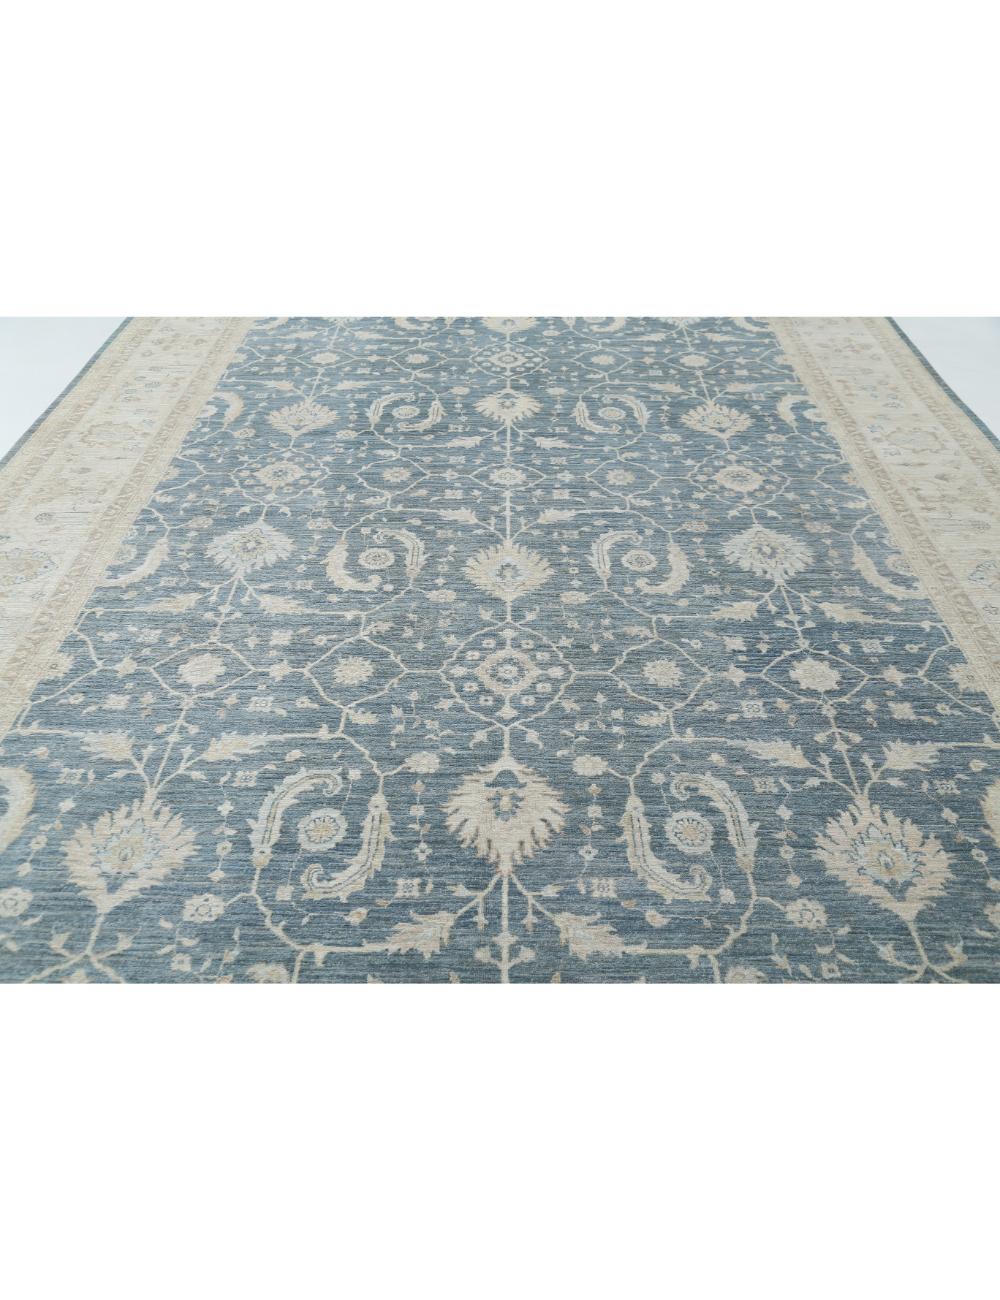 Serenity 9' 9" X 23' 8" Hand-Knotted Wool Rug 9' 9" X 23' 8" (297 X 721) / Blue / Ivory